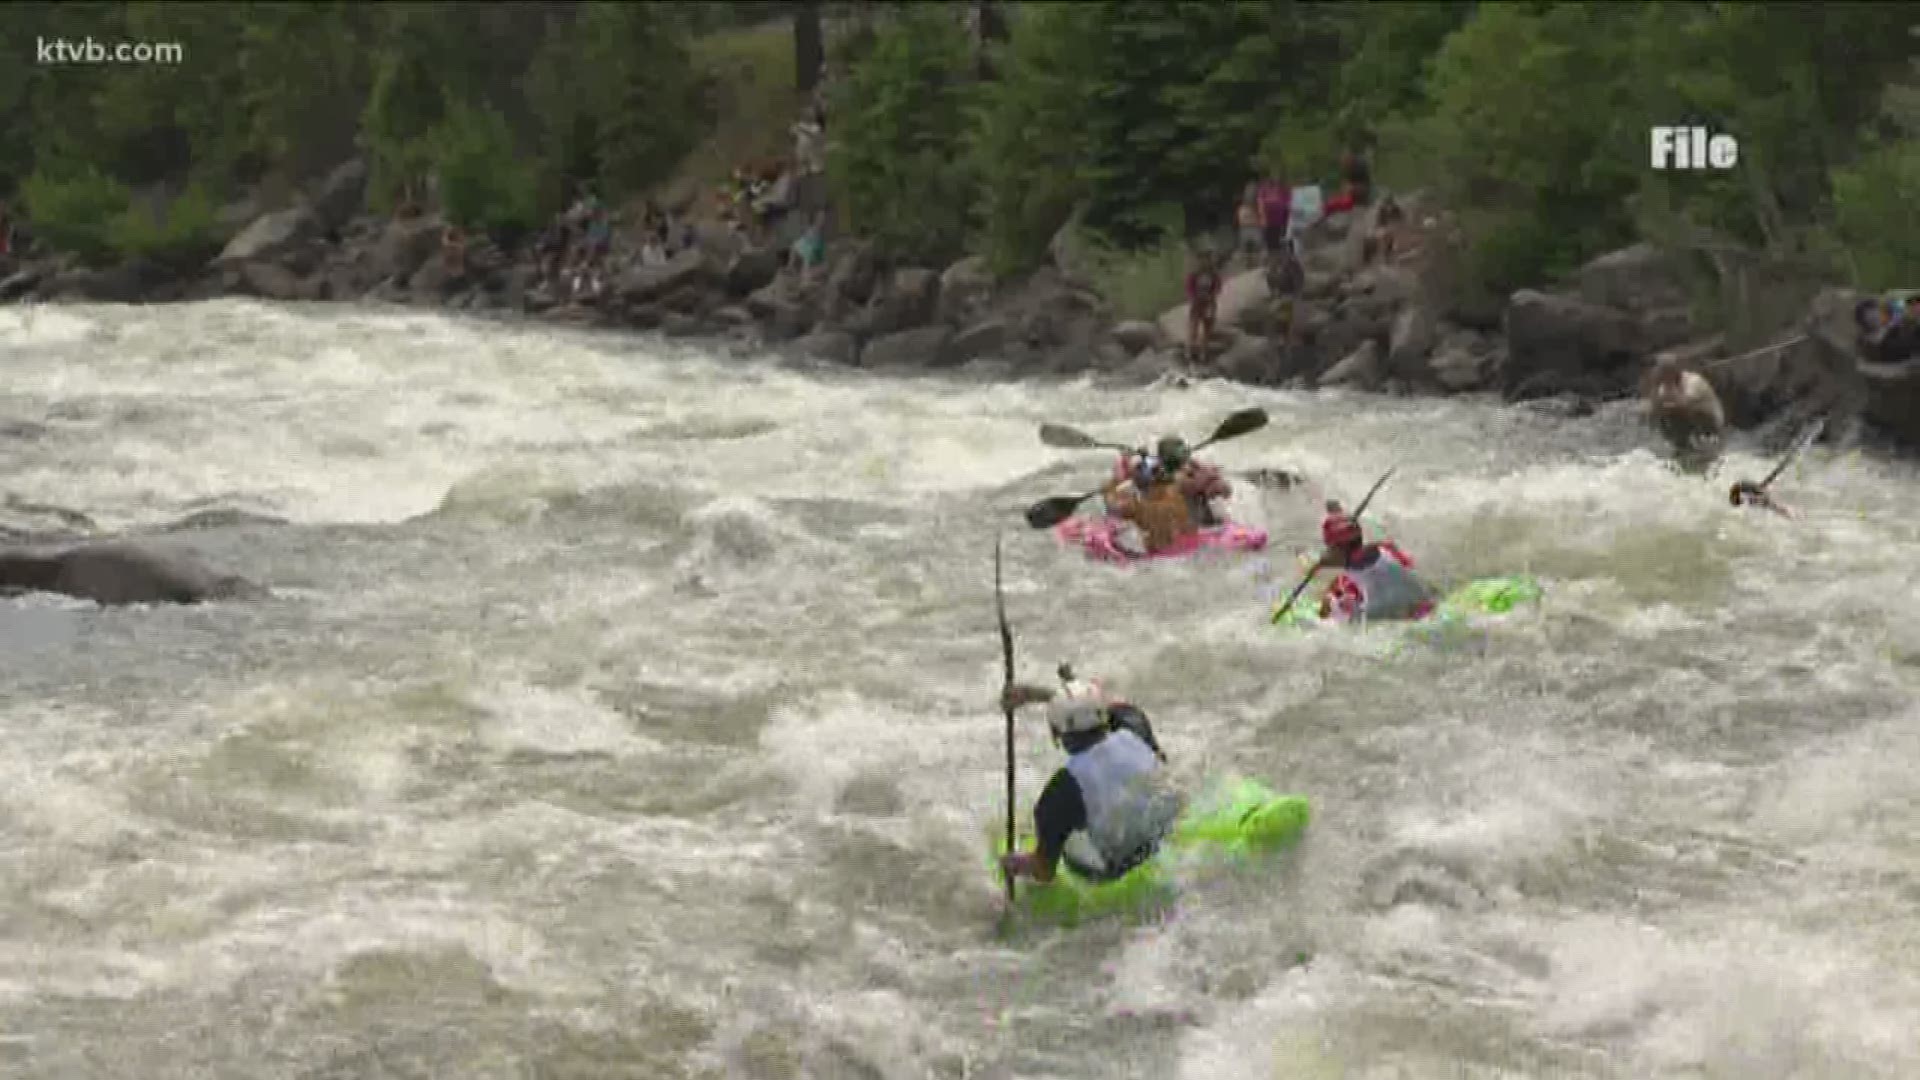 Kayakers from more than 18 countries are competing in this year's race.